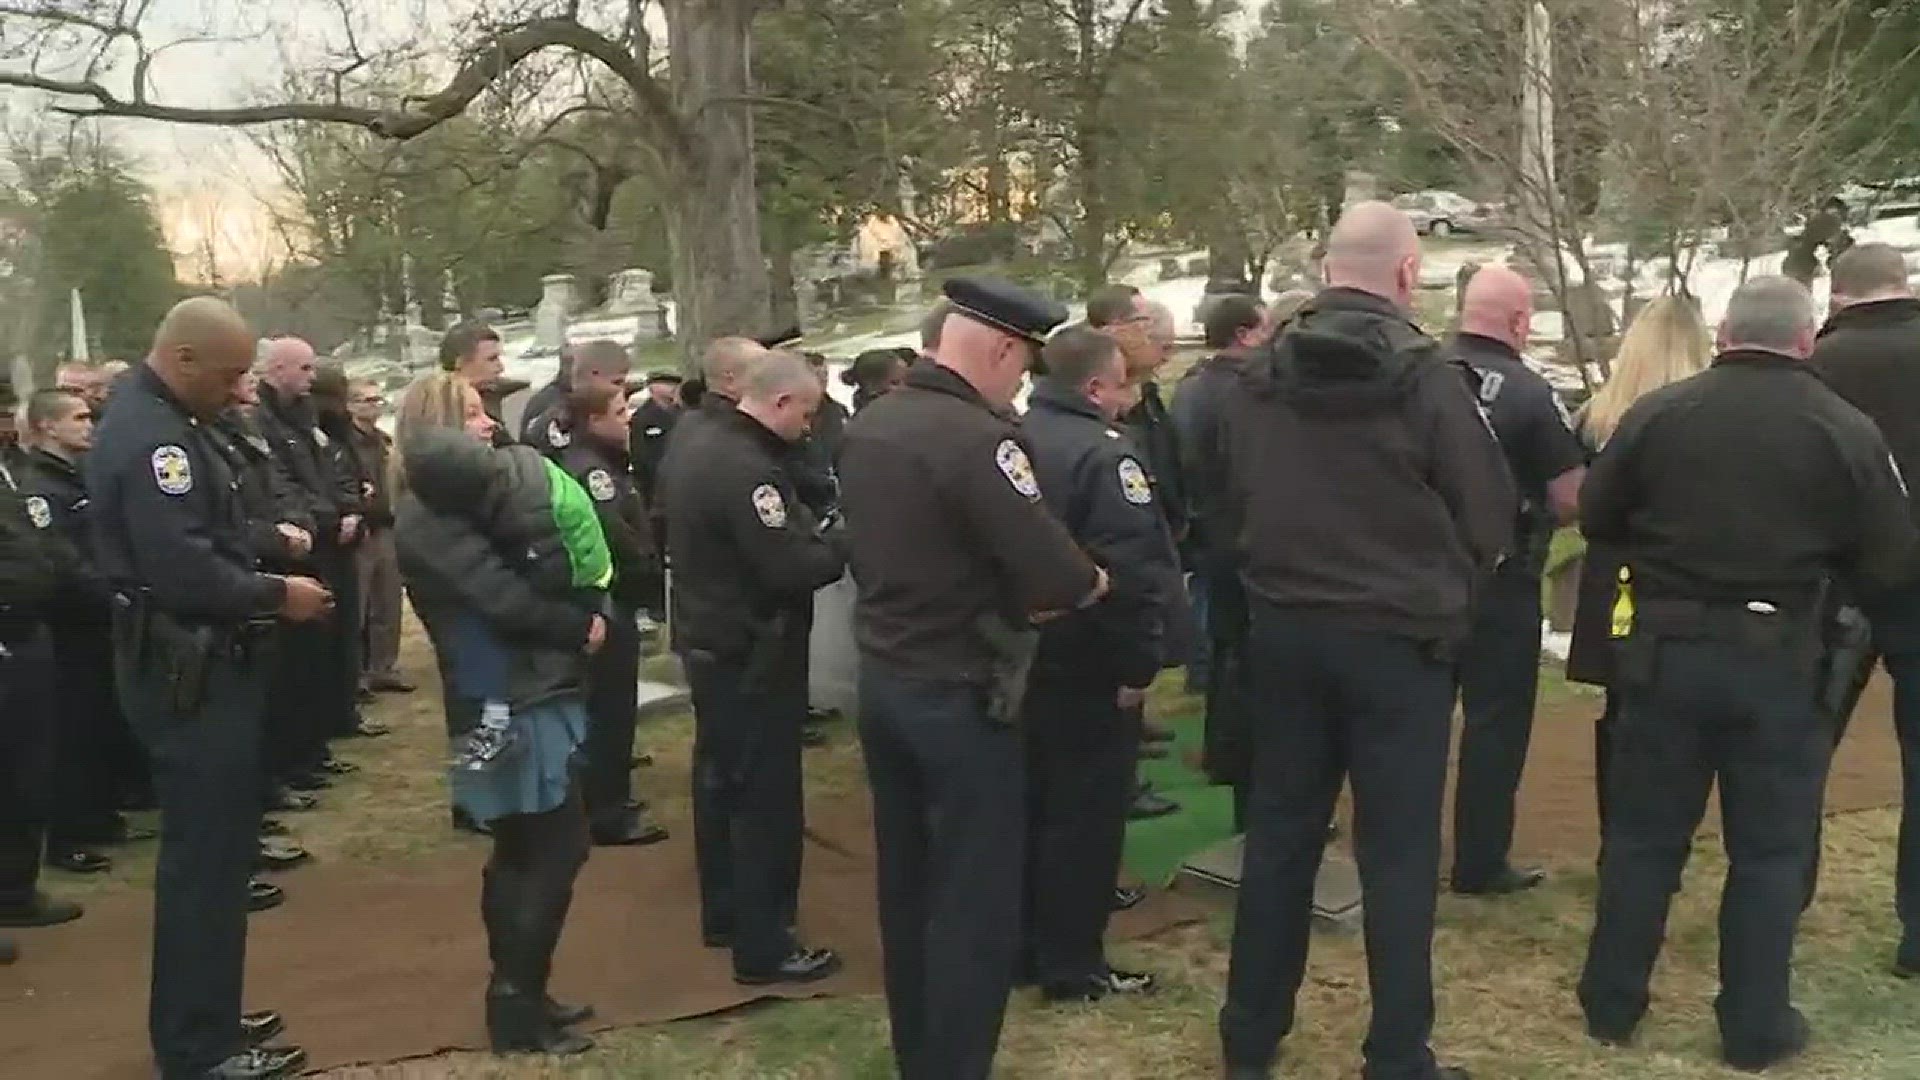 Ceremony honors fallen officer